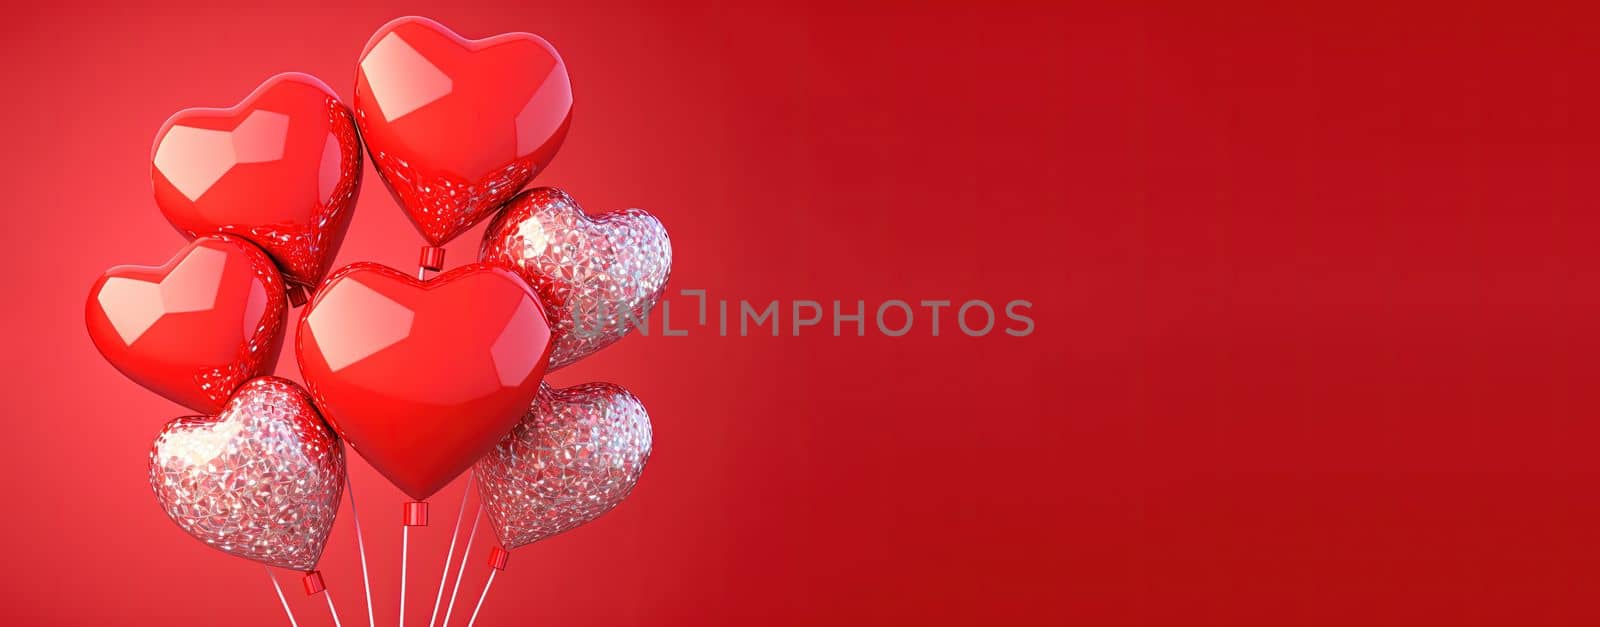 Happy valentines day banner background with shiny red 3d heart shape by templator